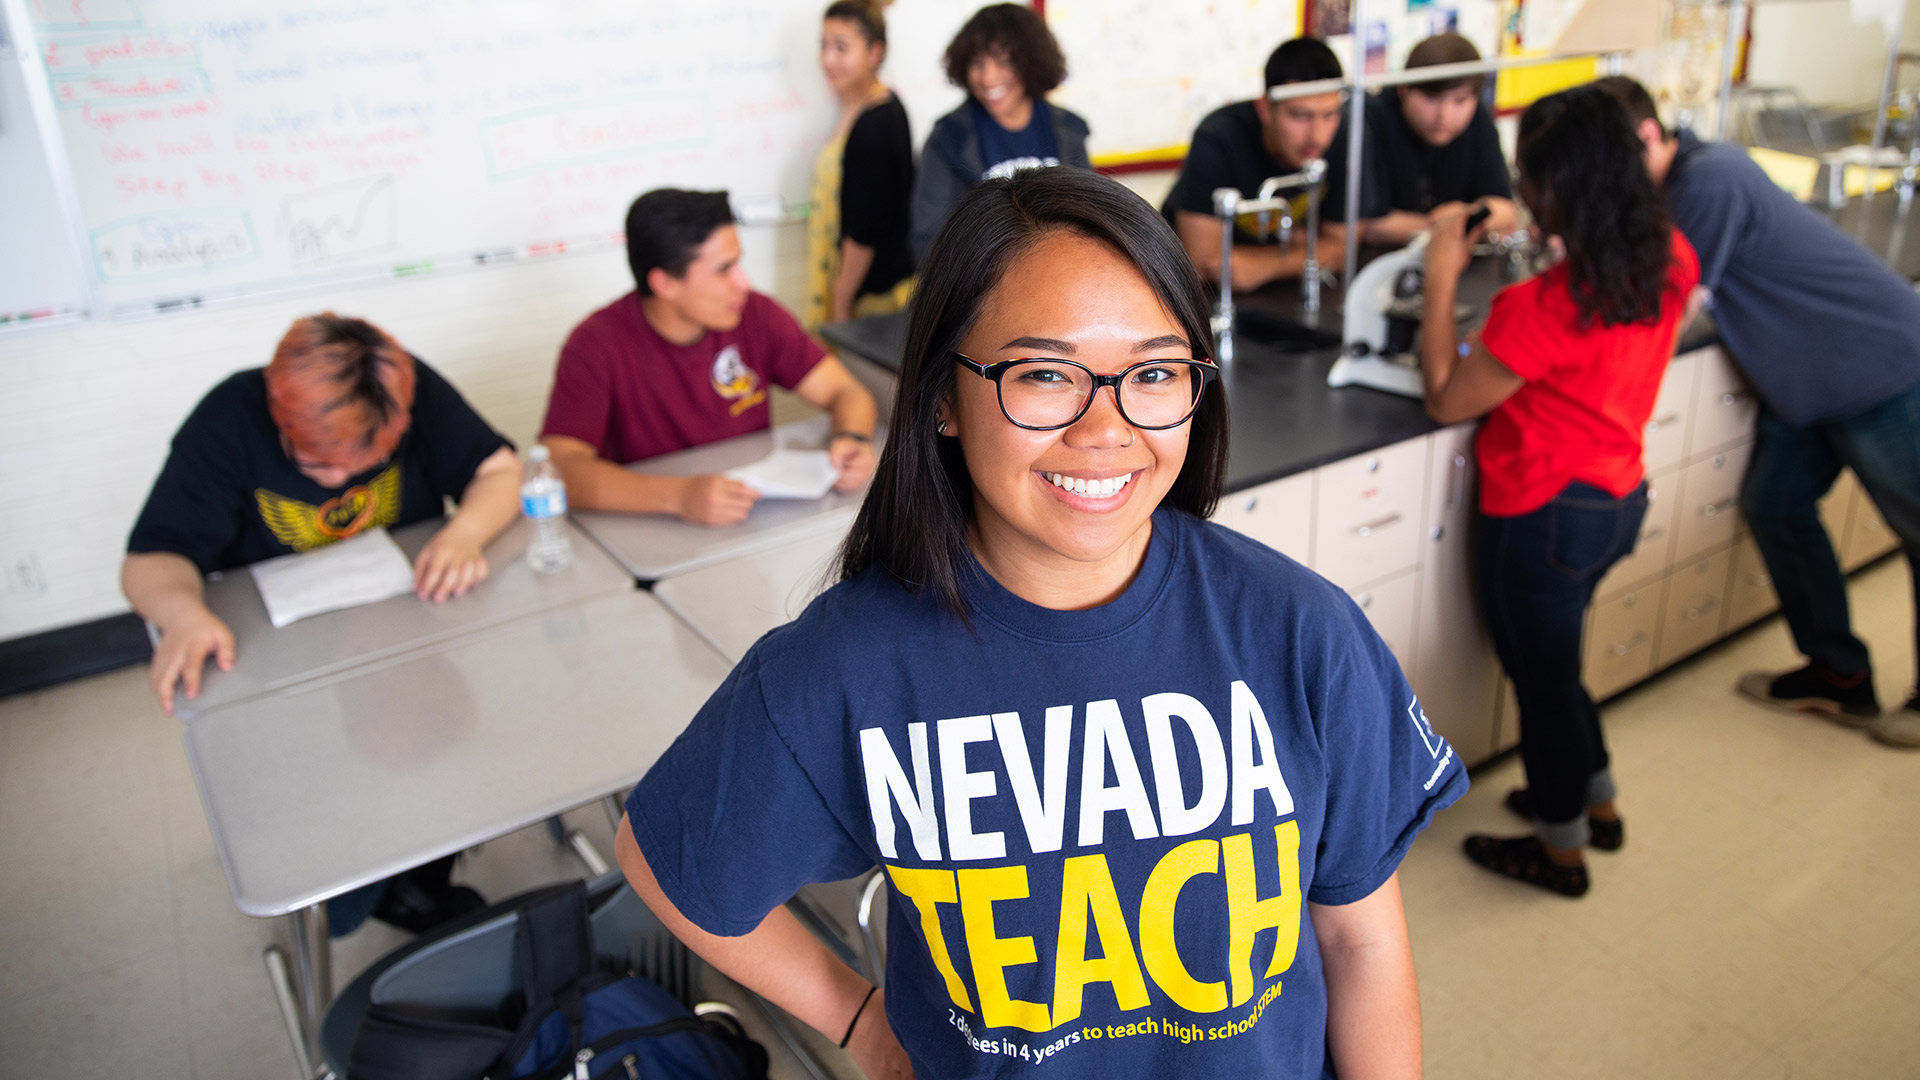 A person wears a NevadaTeach shirt while standing in front of other people seated at a desk.